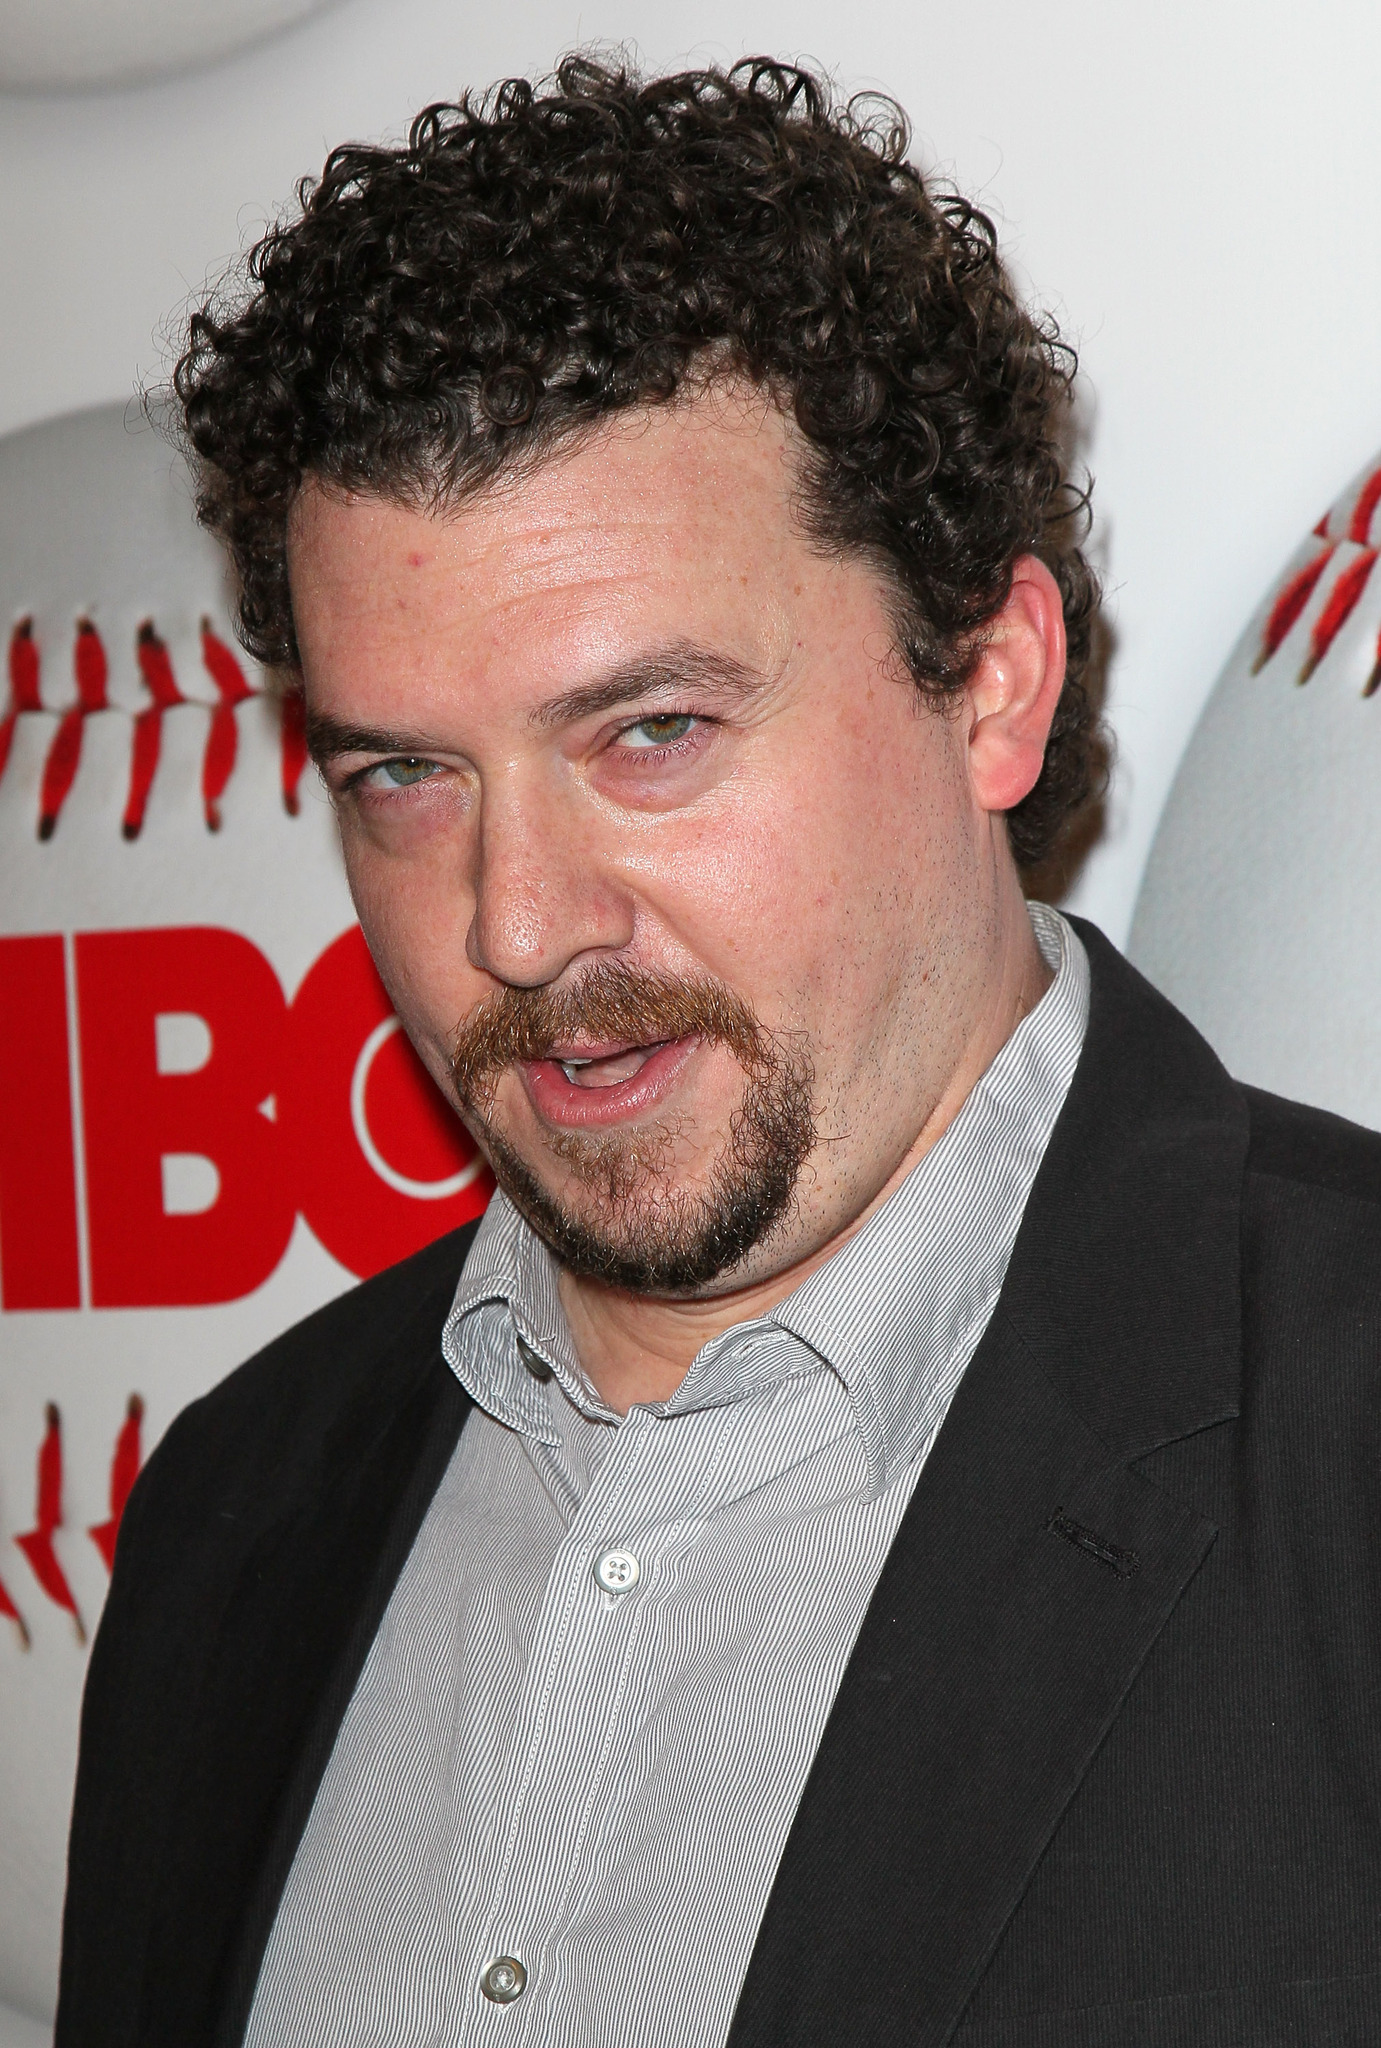 Danny McBride at event of Eastbound & Down (2009)